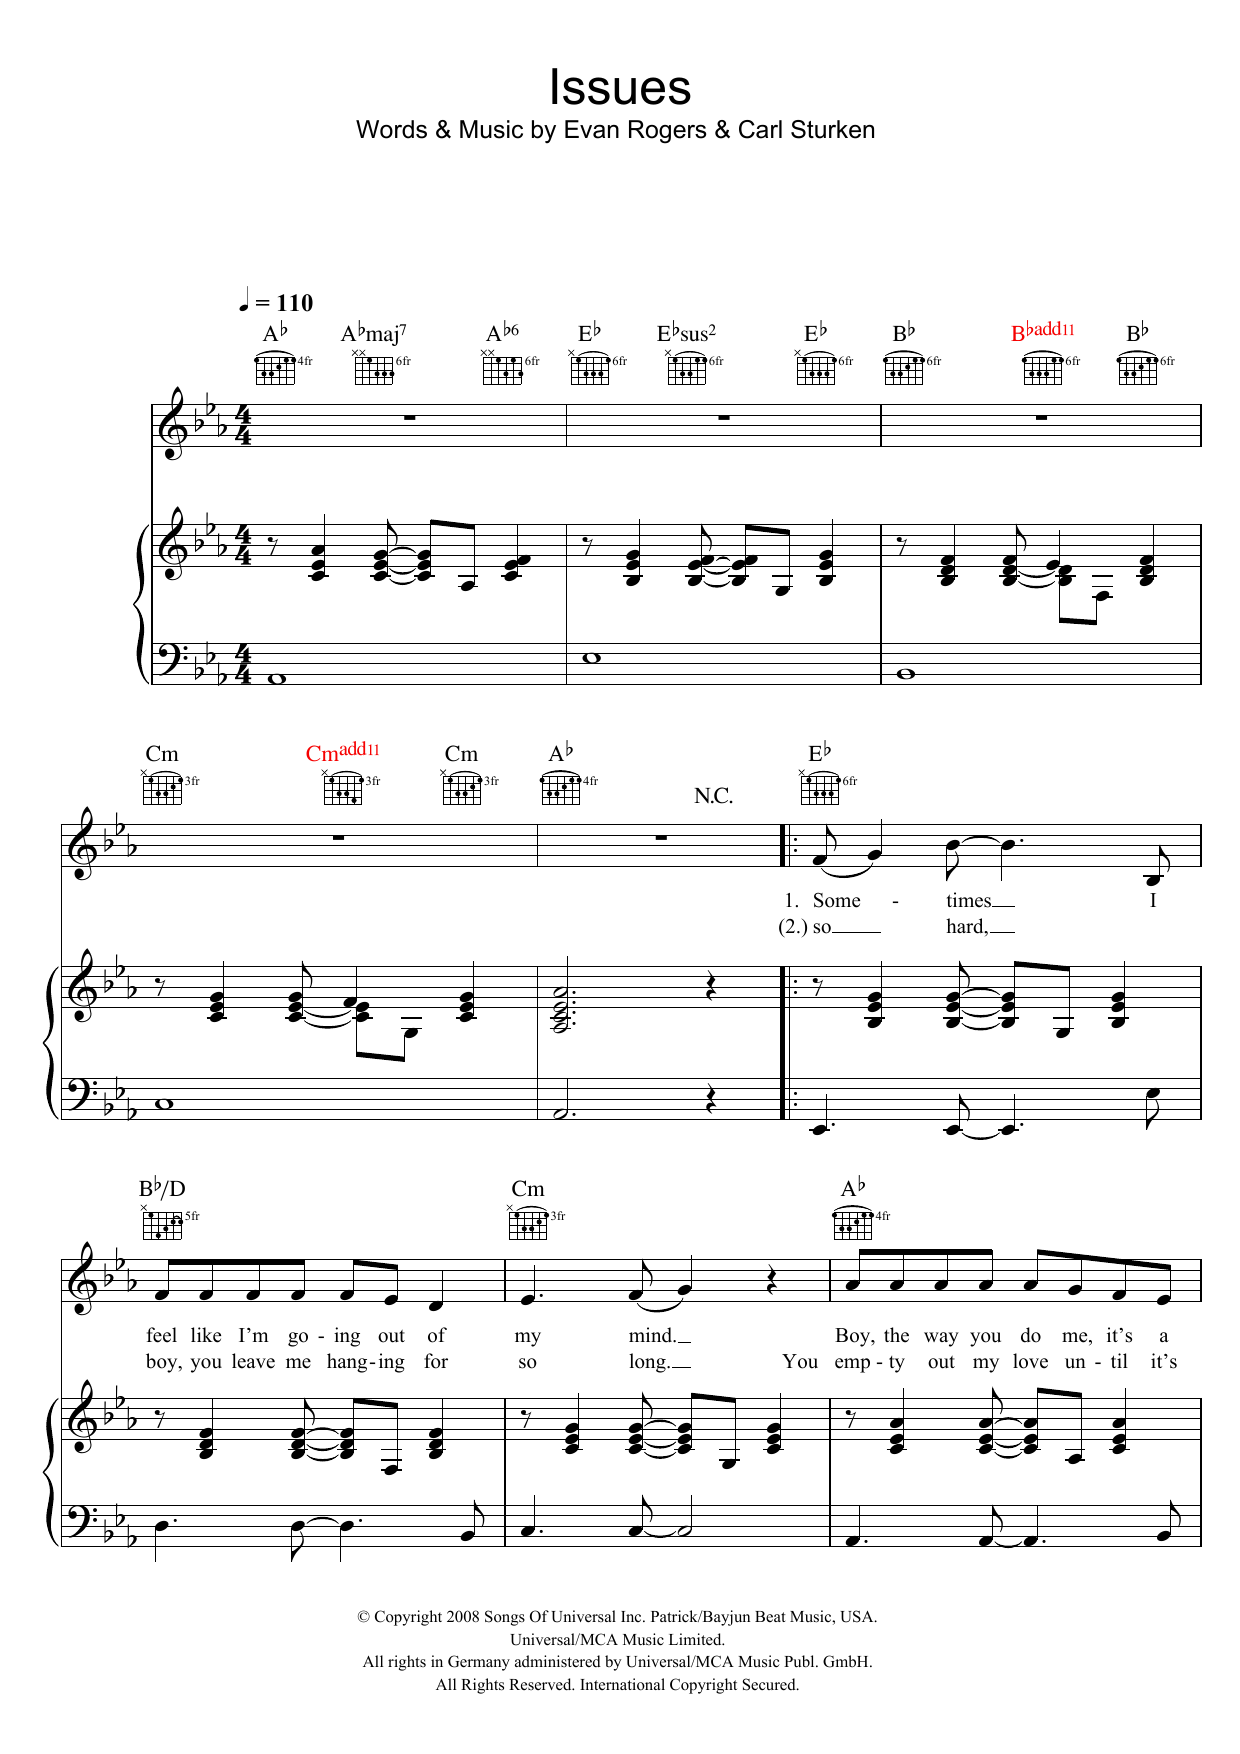 Download The Saturdays Issues Sheet Music